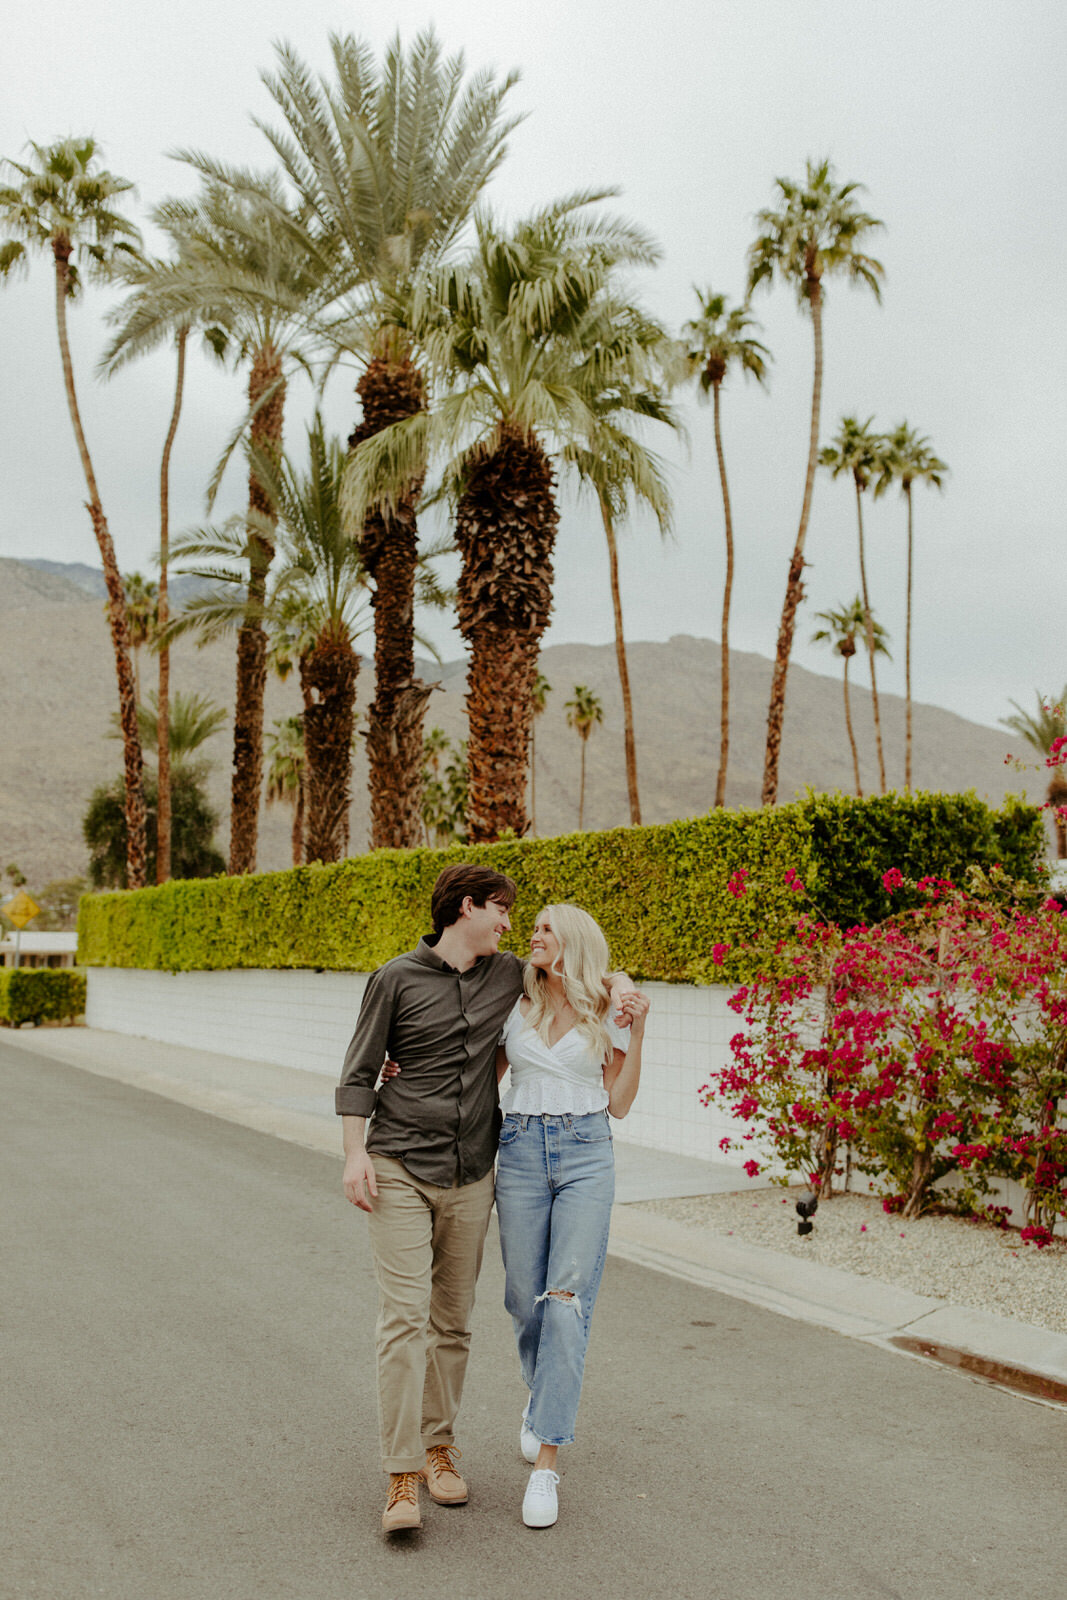 Brianna-Broyles-Photography-Pink-Palm-Springs-Engagement-Session-27.jpg